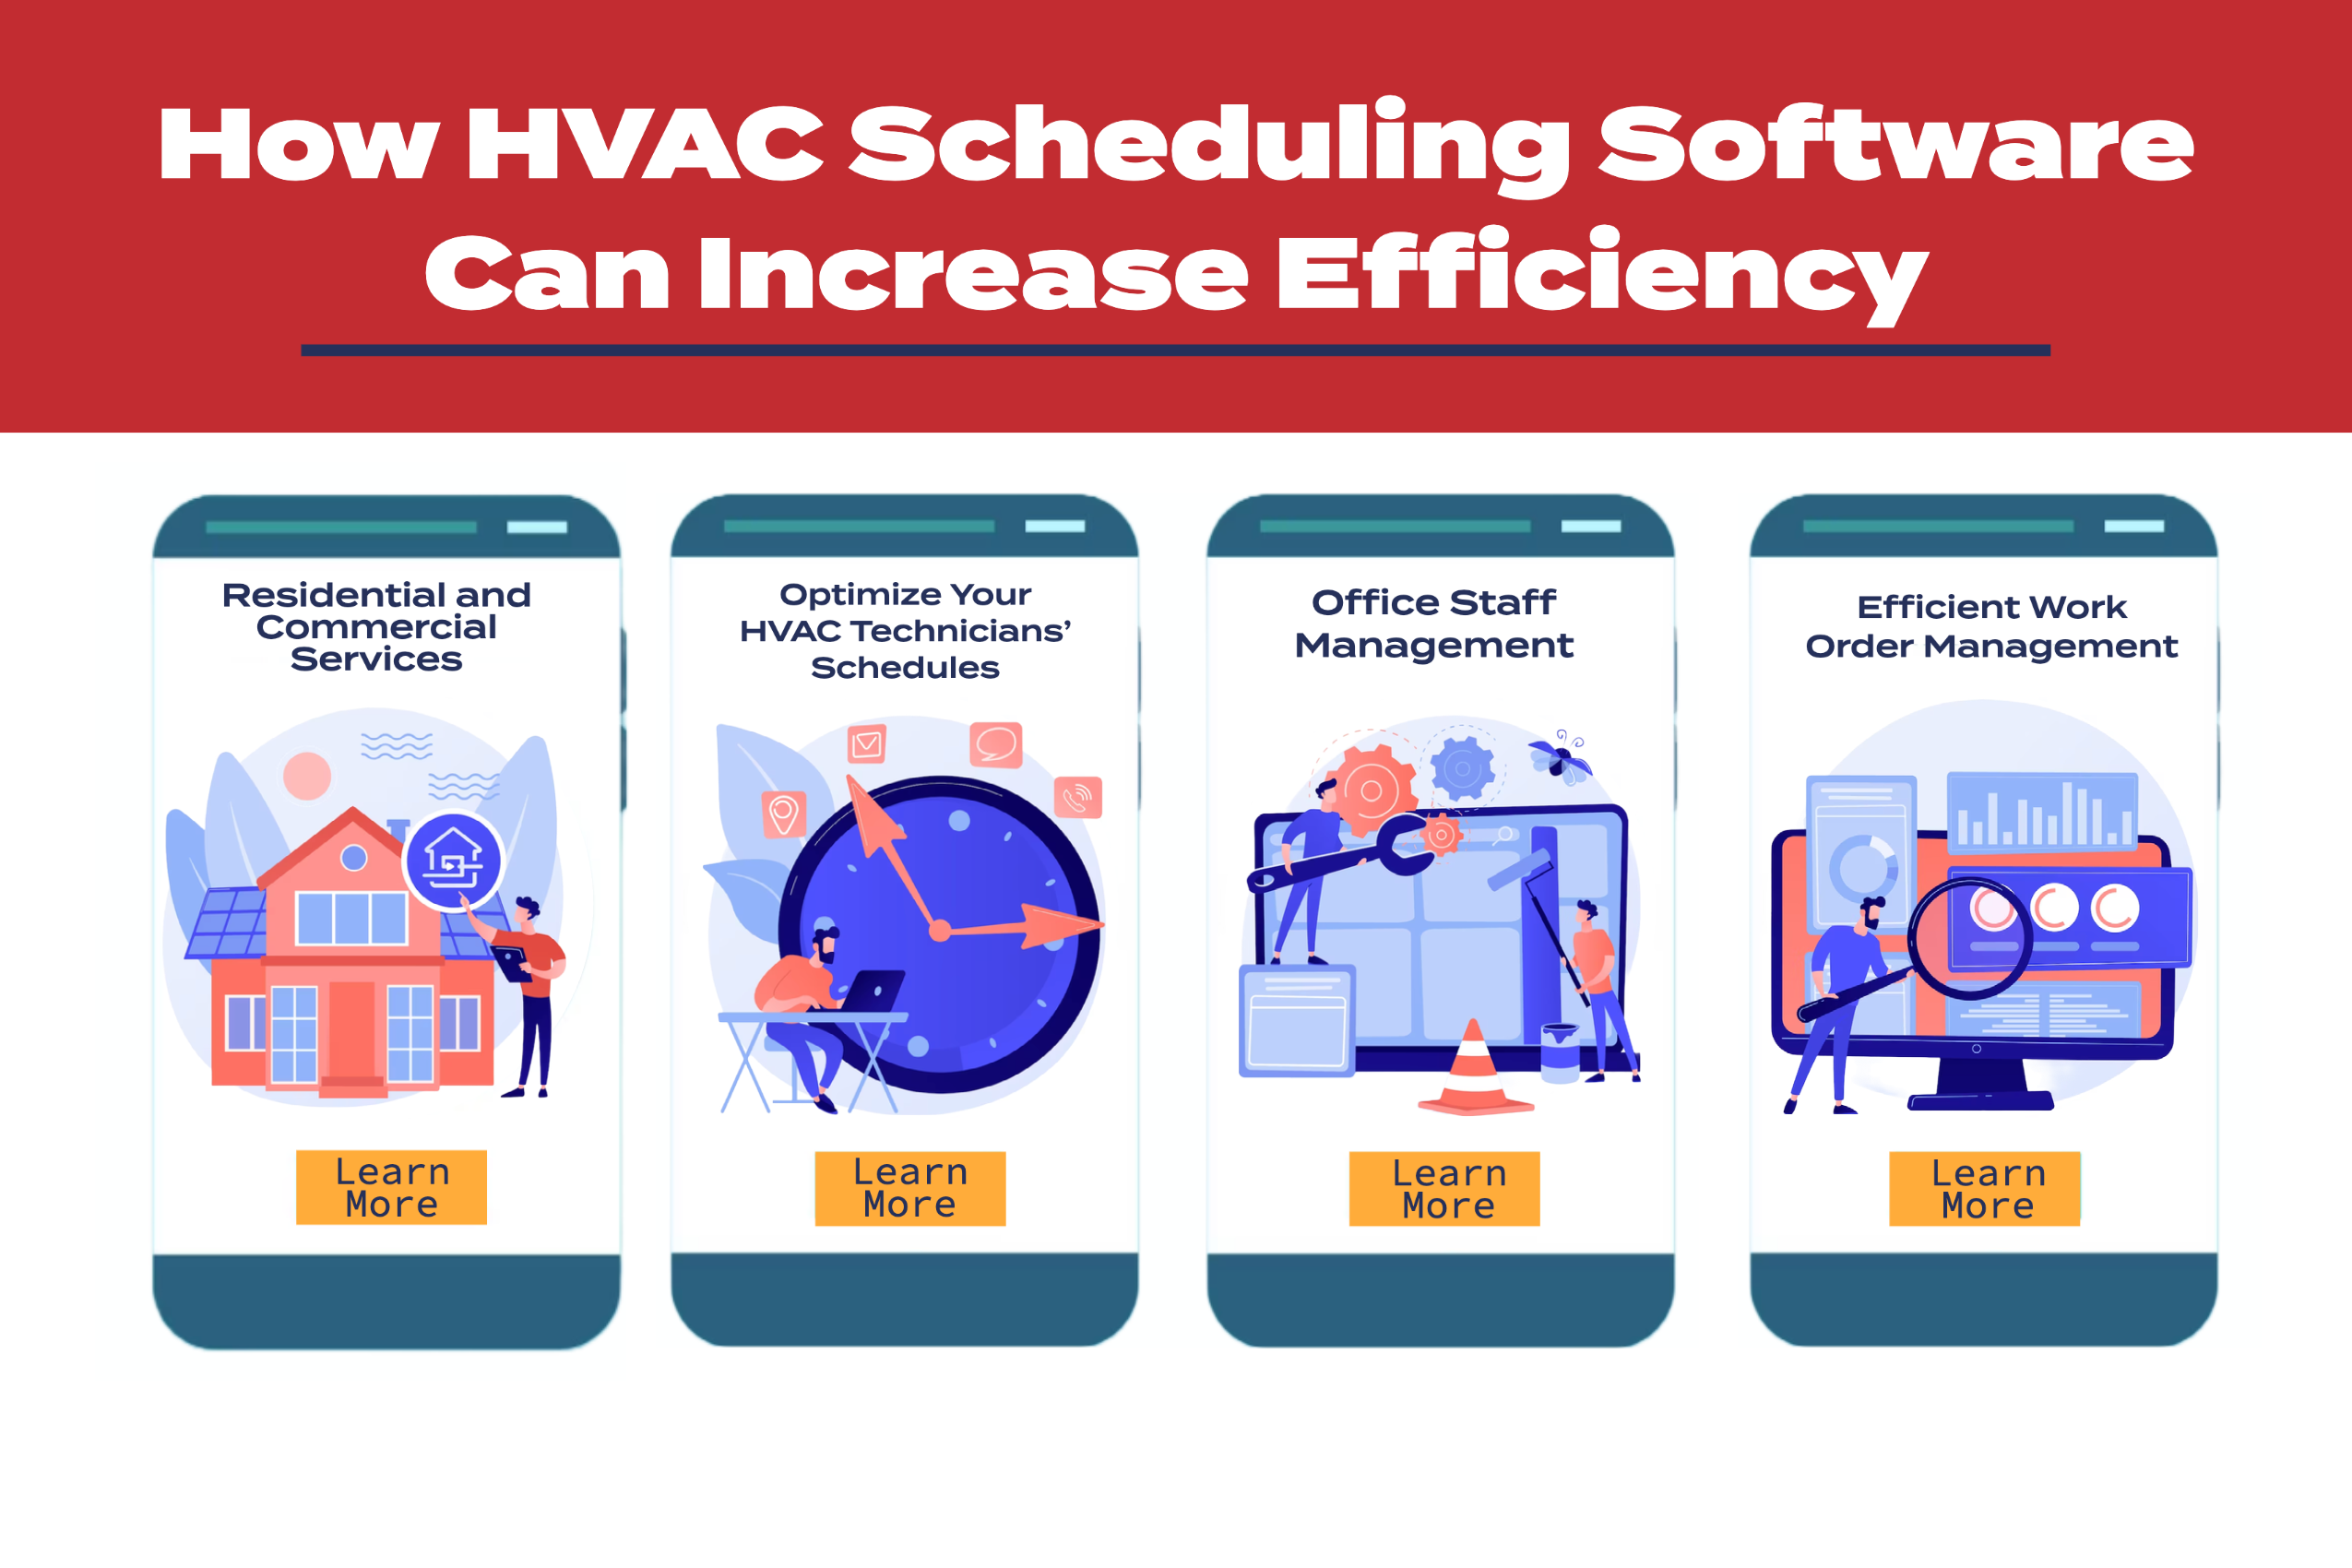 How HVAC Scheduling Software Can Increase Efficiency